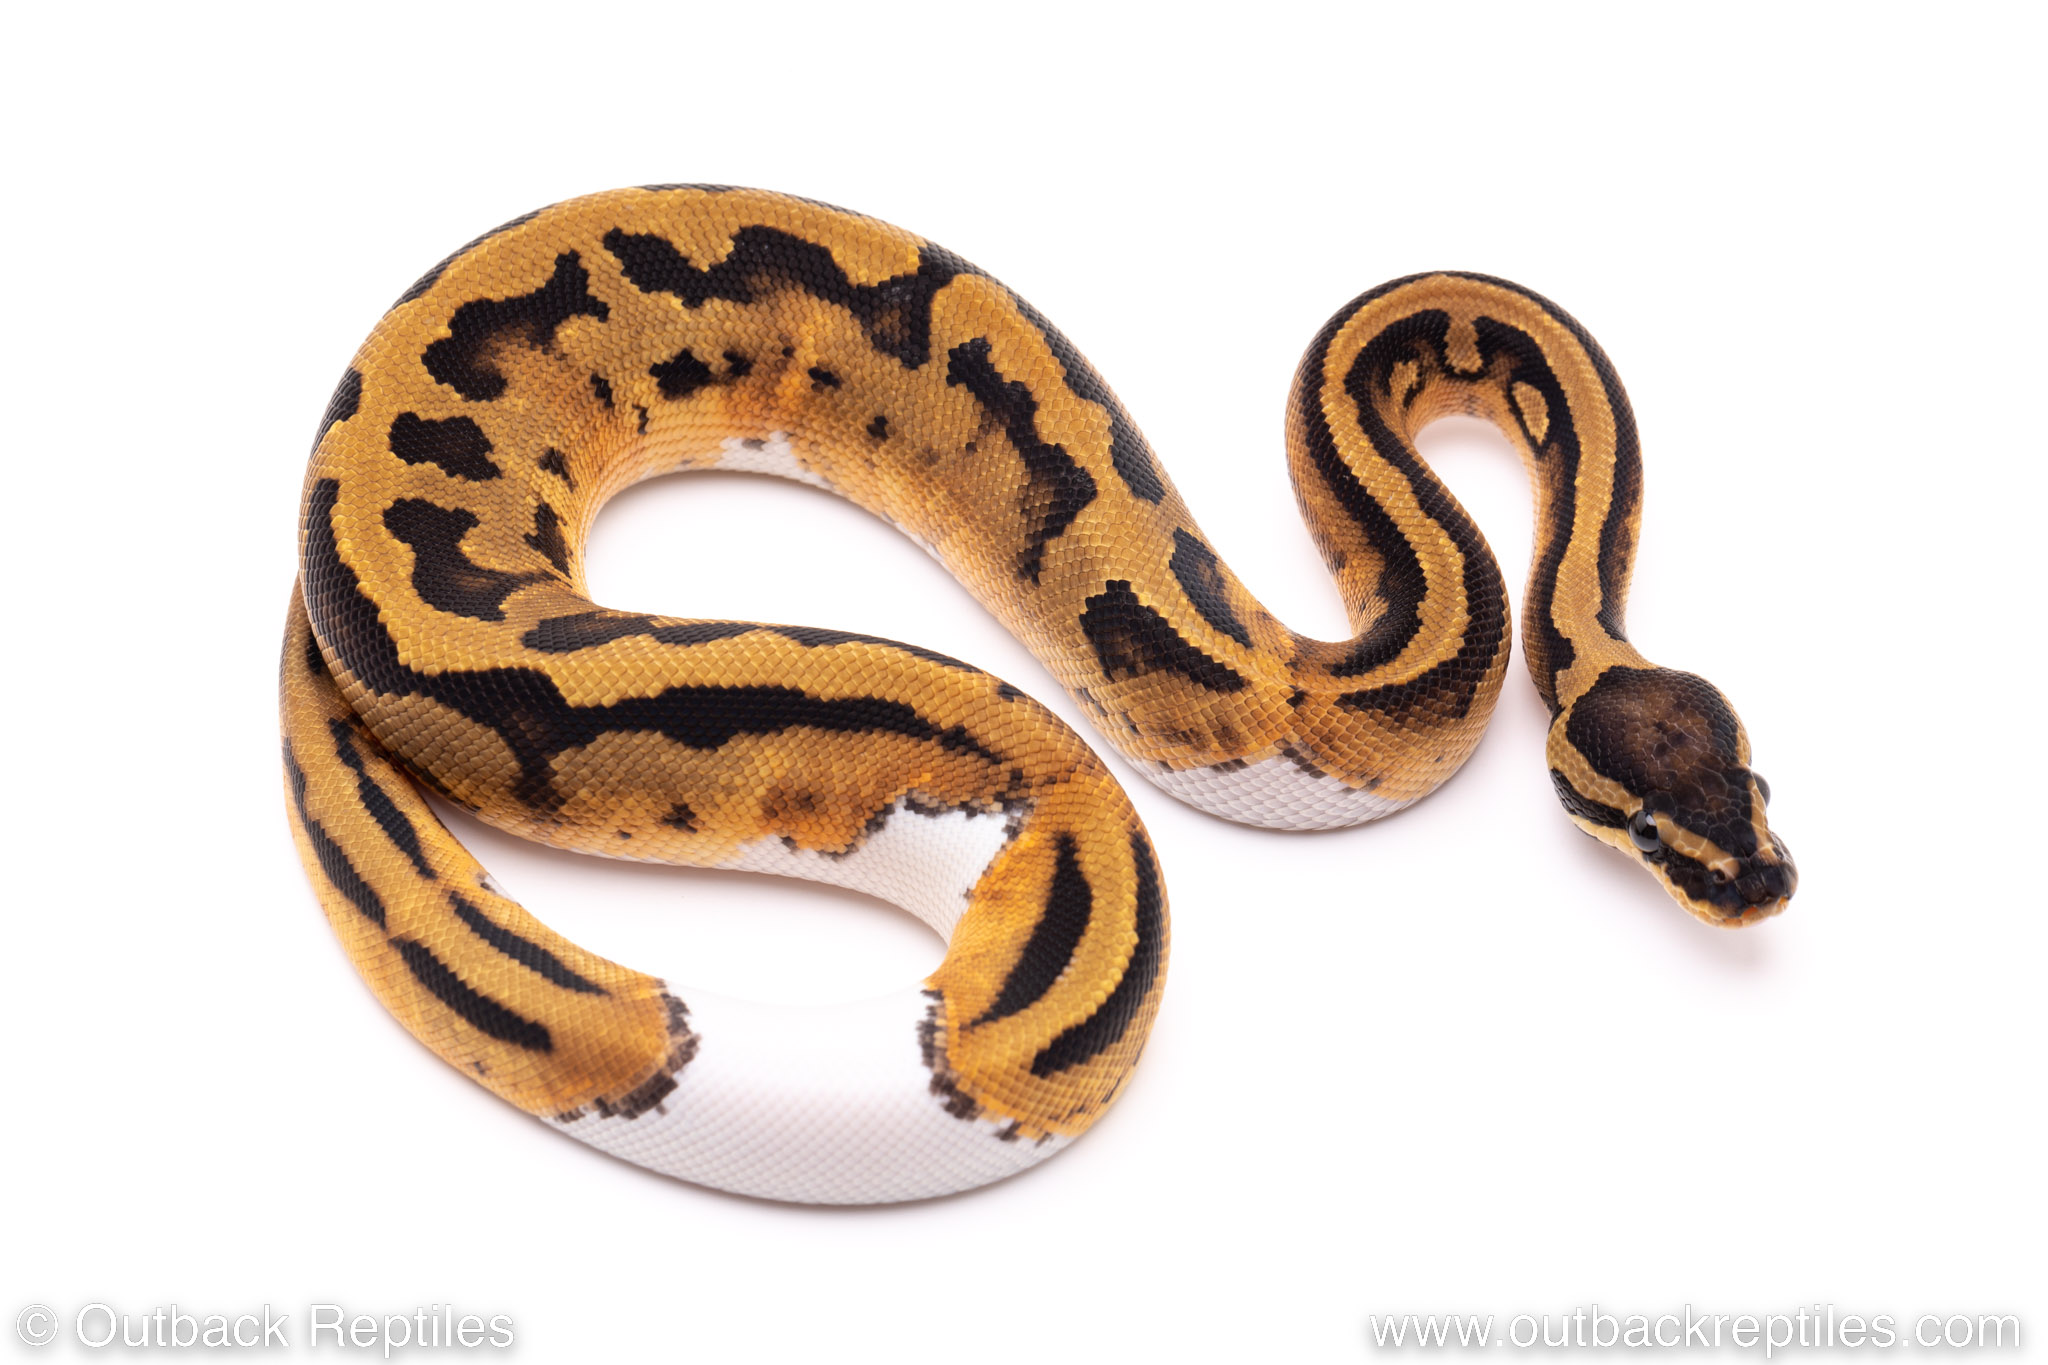 Pied het. VPI Axanthic – Male #1 for sale | Outback Reptiles